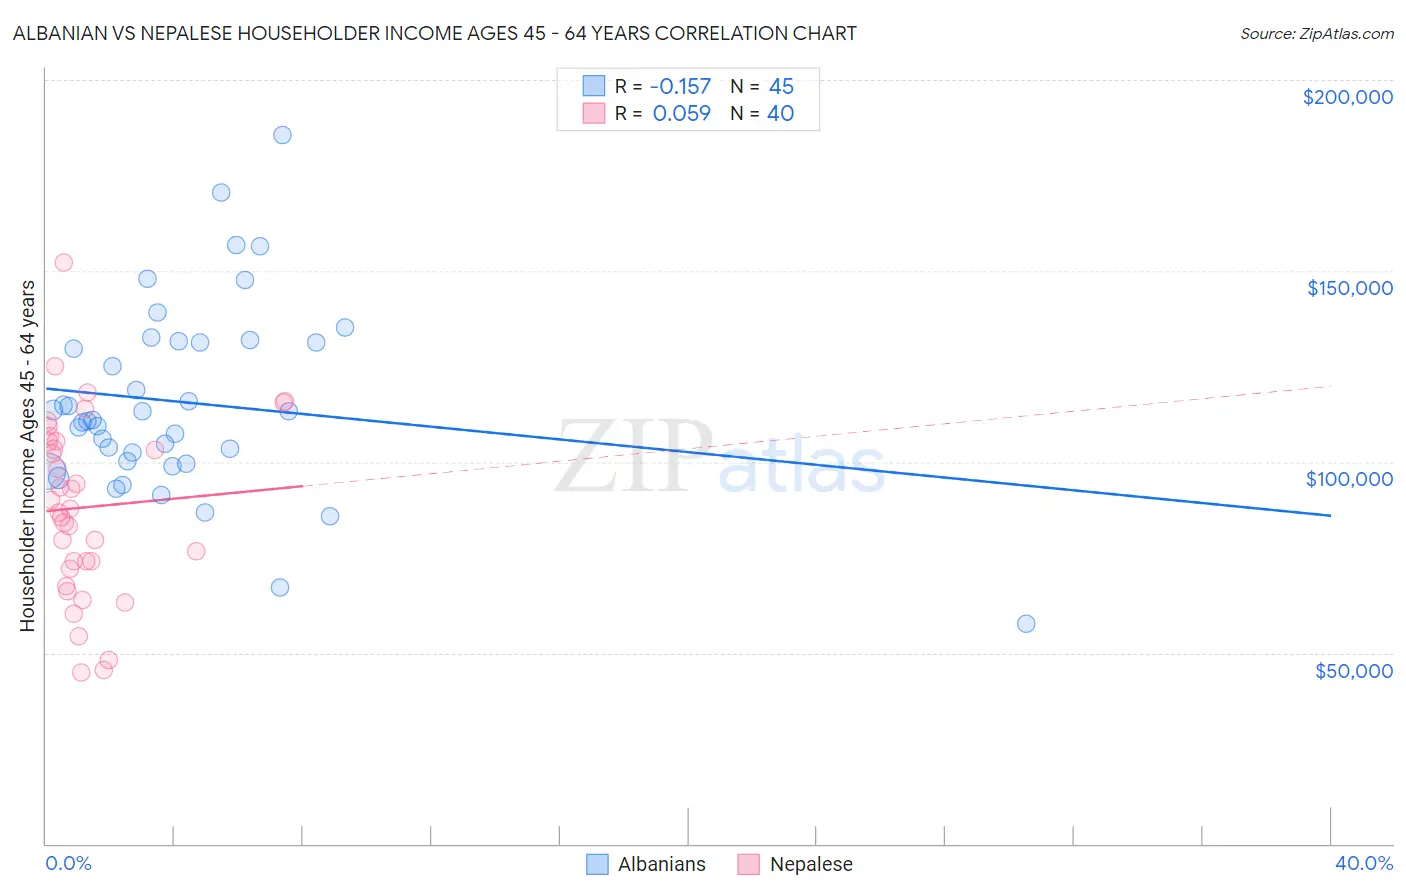 Albanian vs Nepalese Householder Income Ages 45 - 64 years